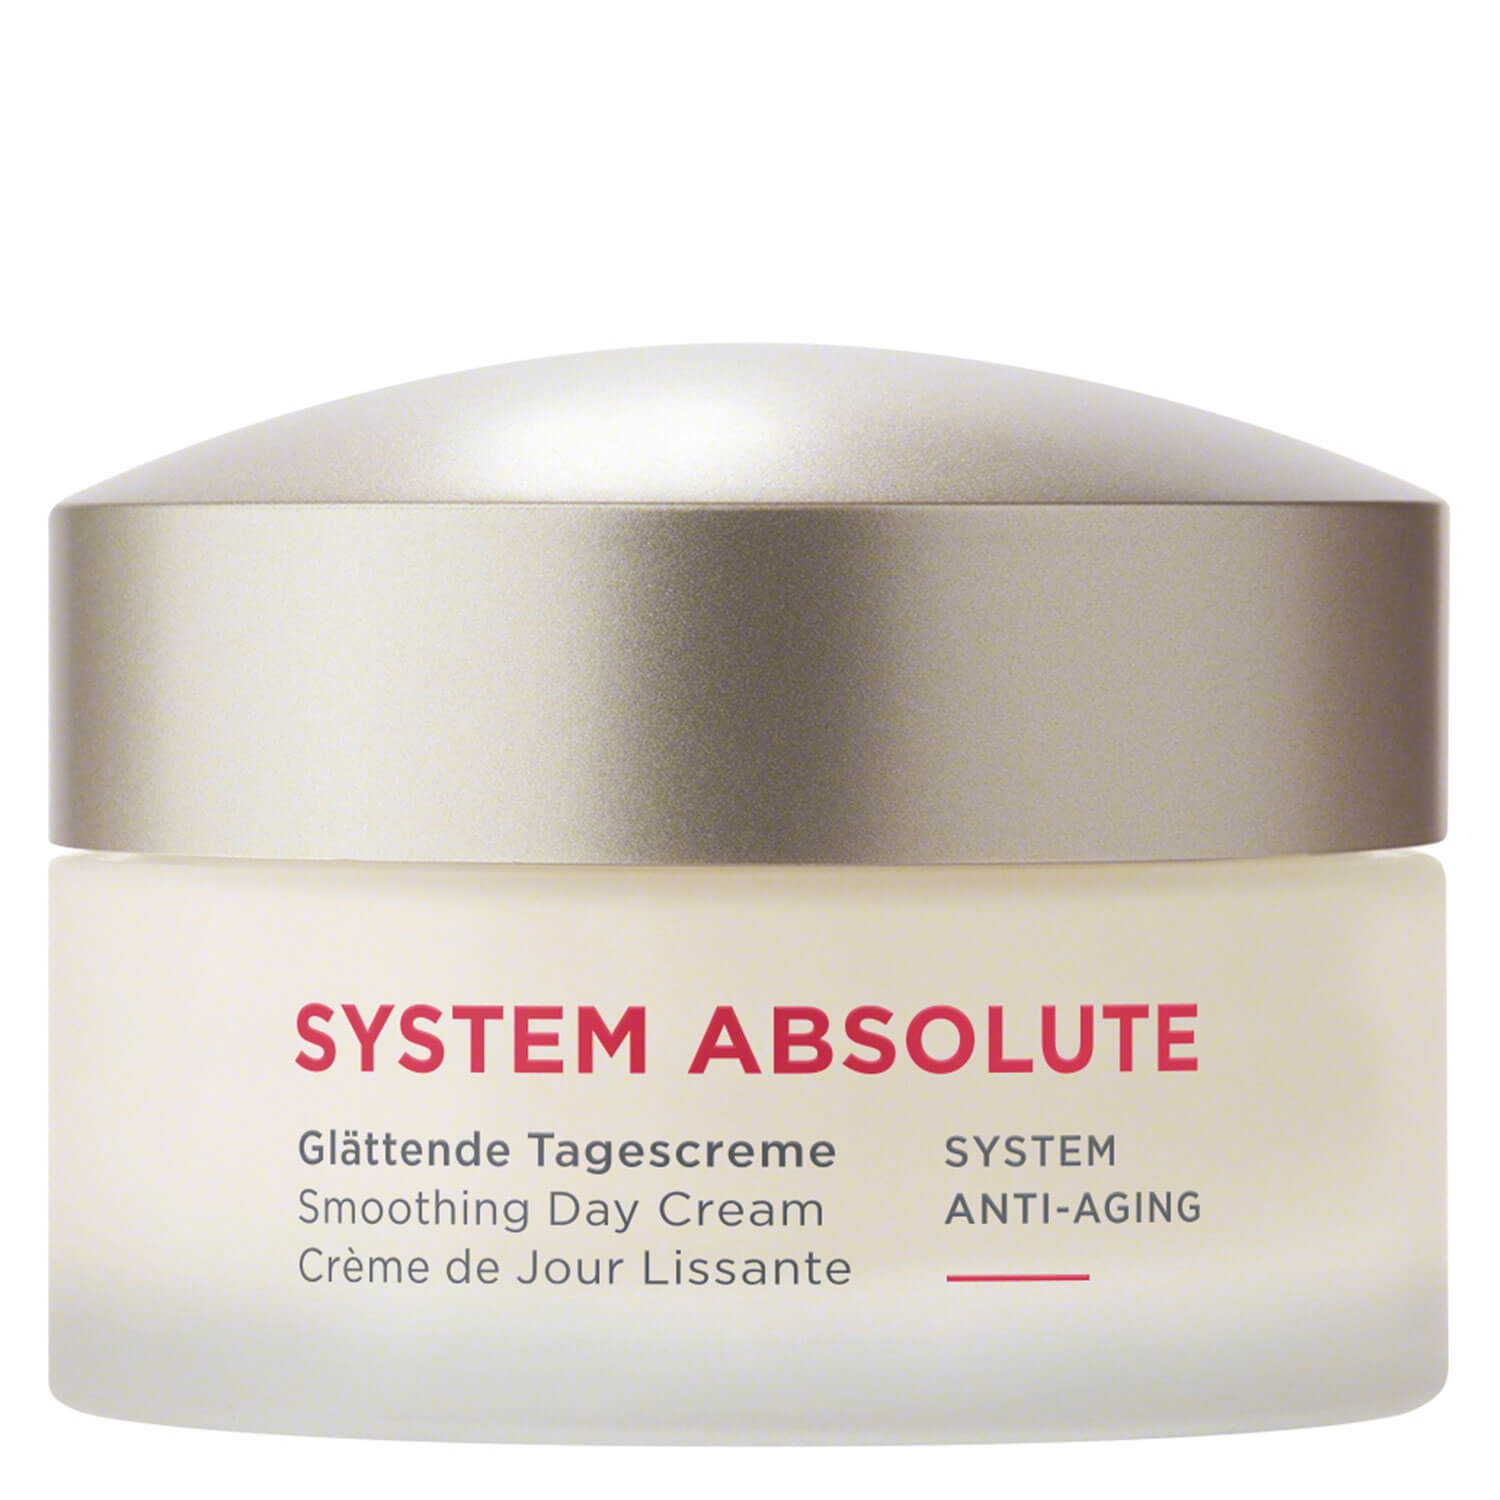 Product image from System Absolute - Anti-Aging Glättende Tagescreme